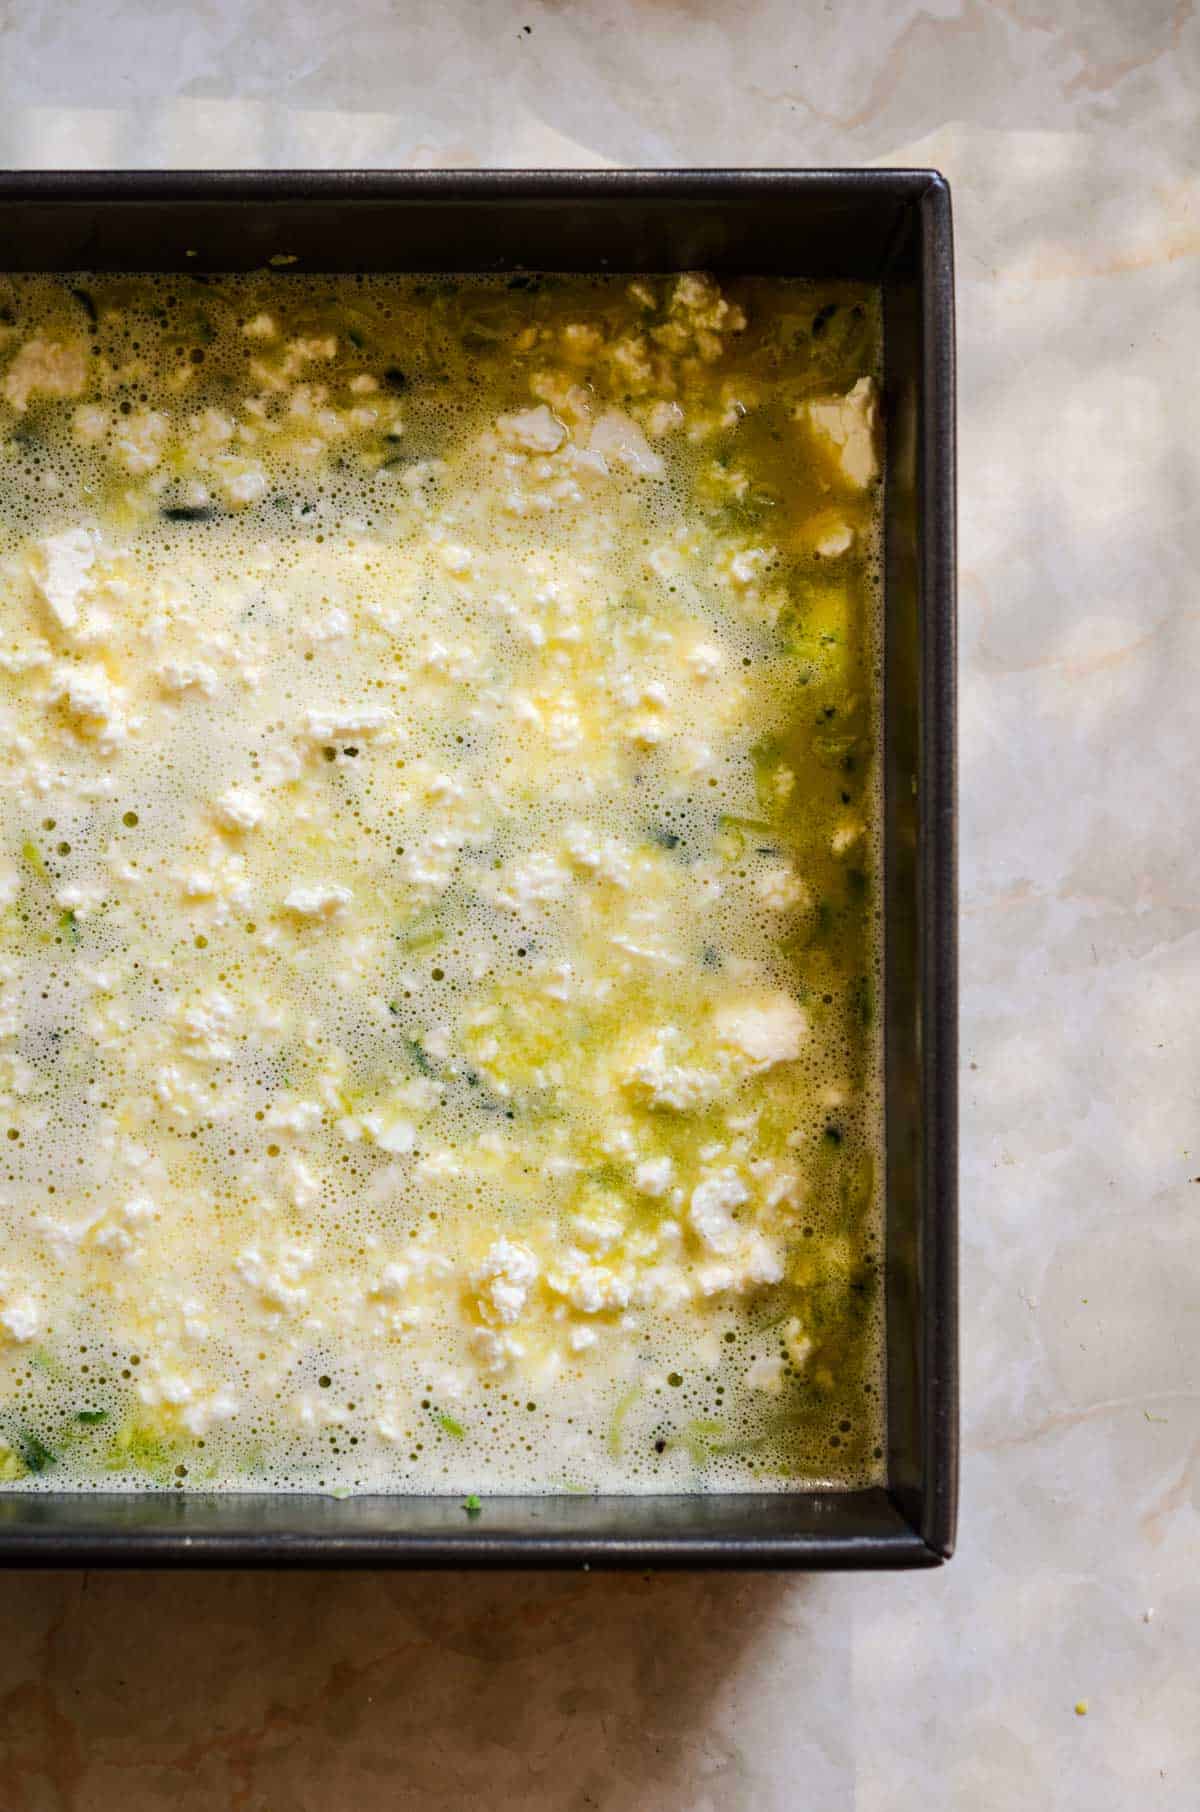 Zucchini, whisked eggs, feta, in baking pan ready to be baked.